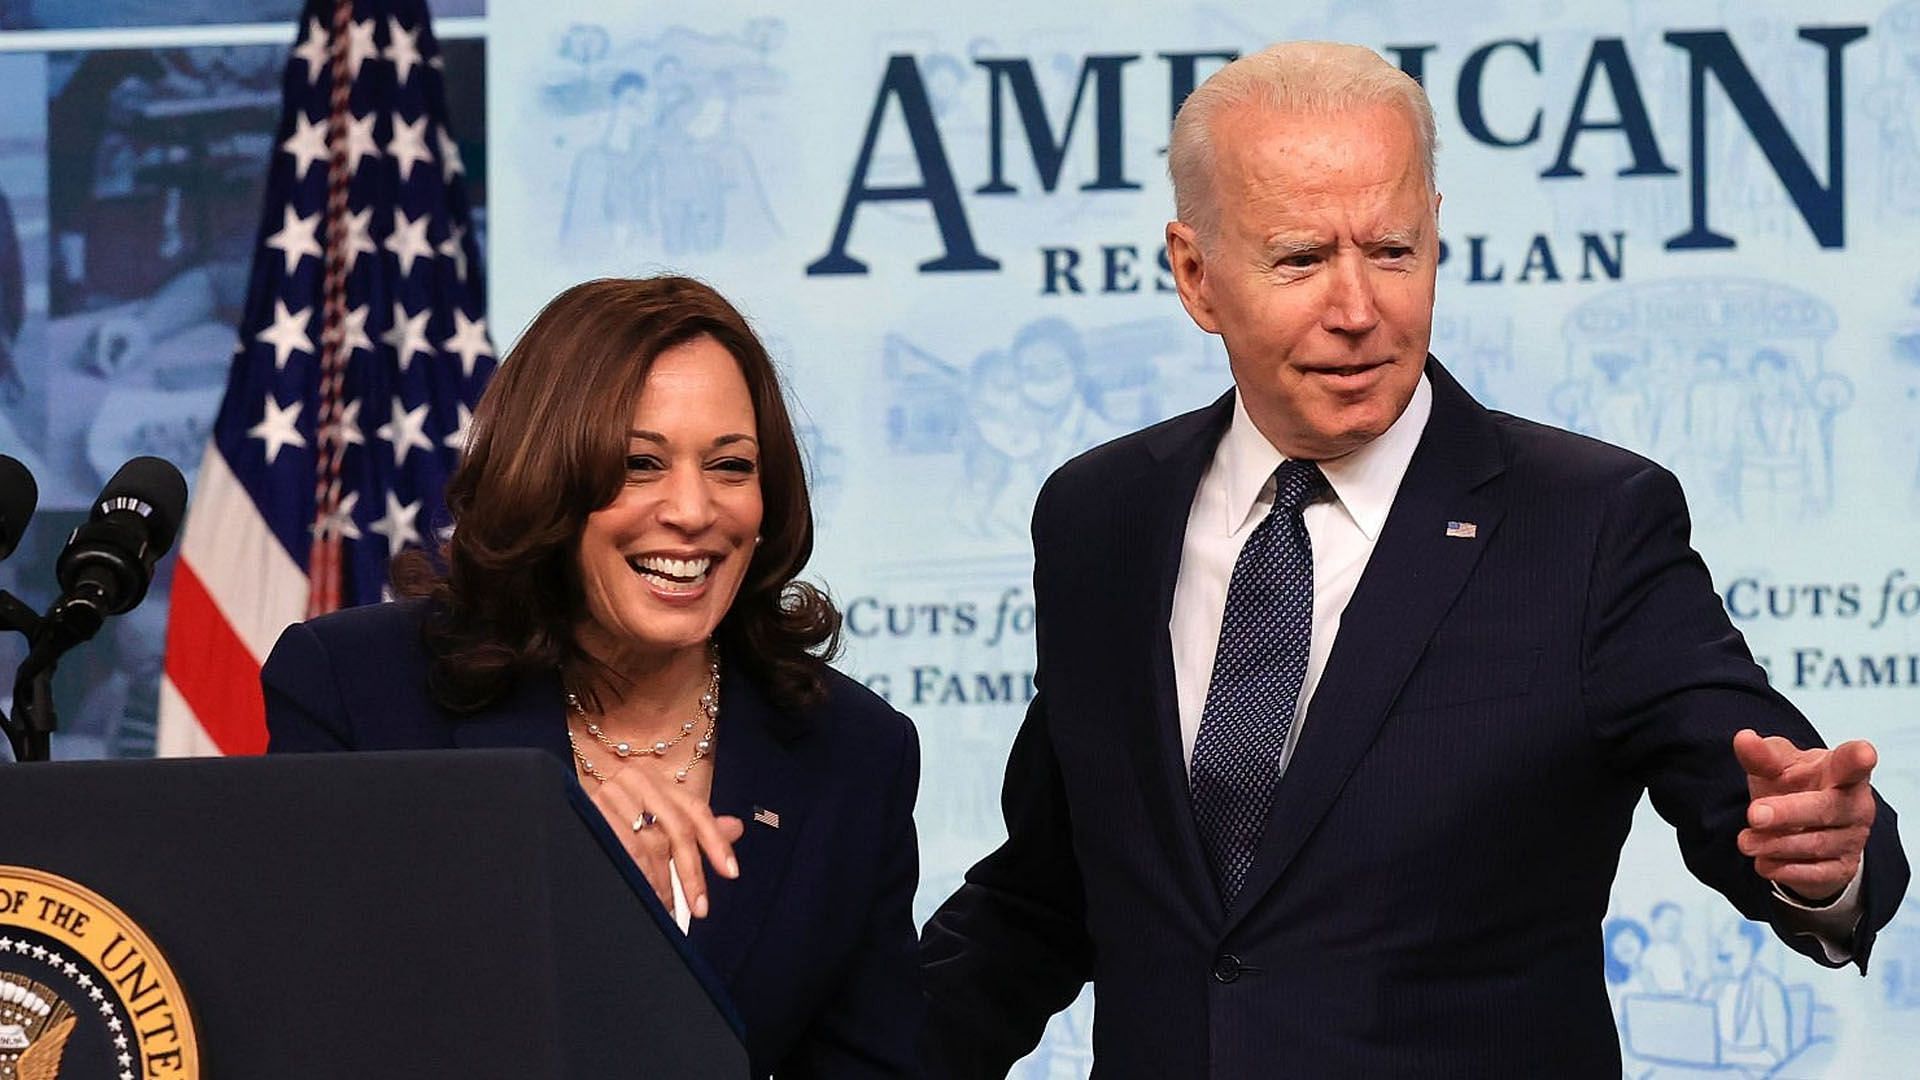 Joe Biden with Kamala Harris at a conference in 2021 (Image via Getty Images)